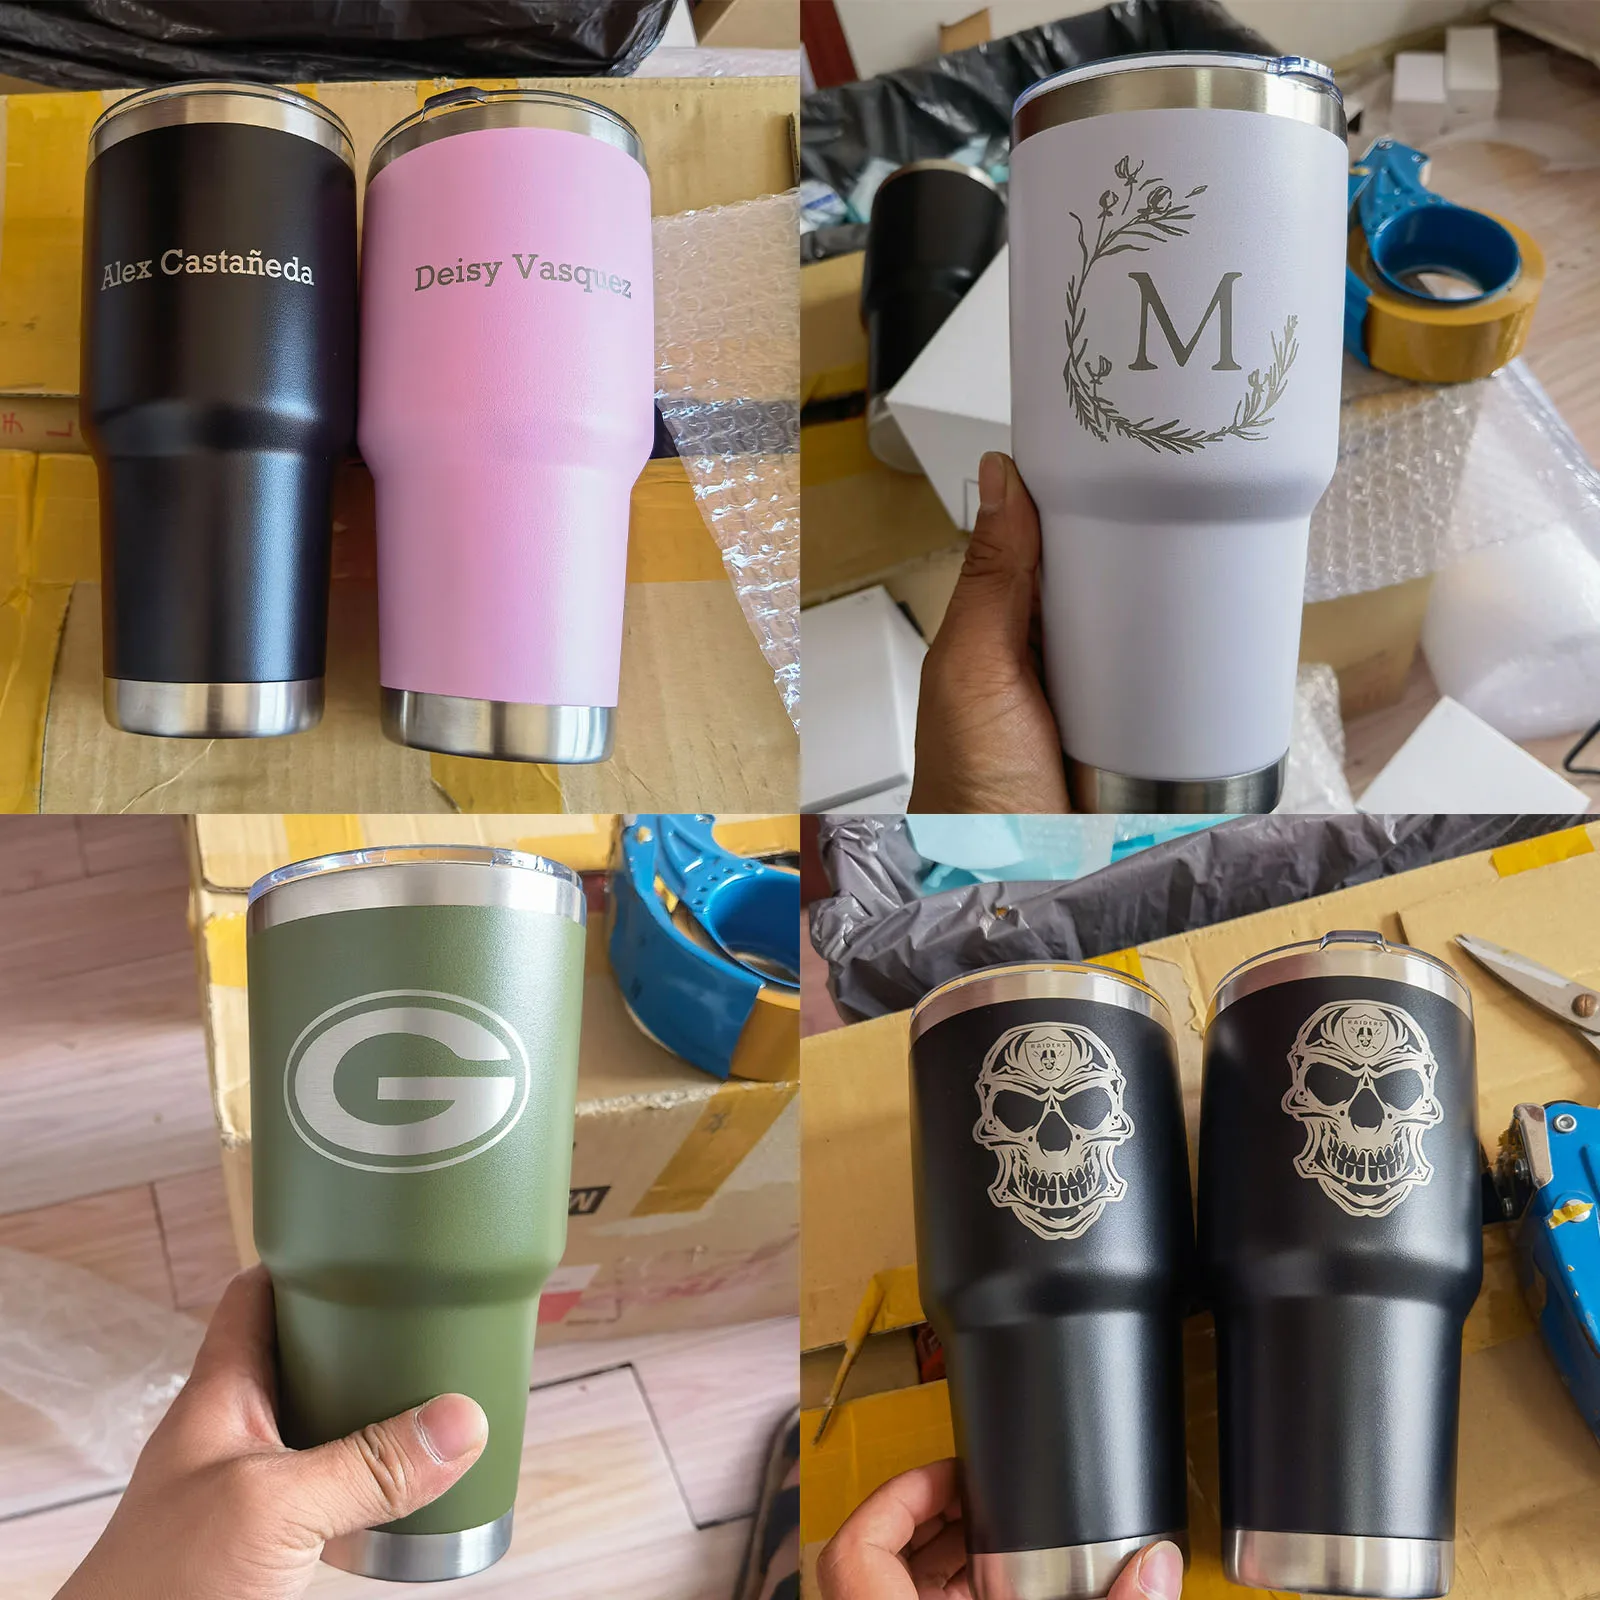 https://ae01.alicdn.com/kf/Sa288904a24f64d77986a179431baa0e1D/Personalized-Tumbler-for-Dad-Father-Grandpa-Husband-Funny-Gifts-for-Men-Pop-Gifts-for-Father-s.jpg